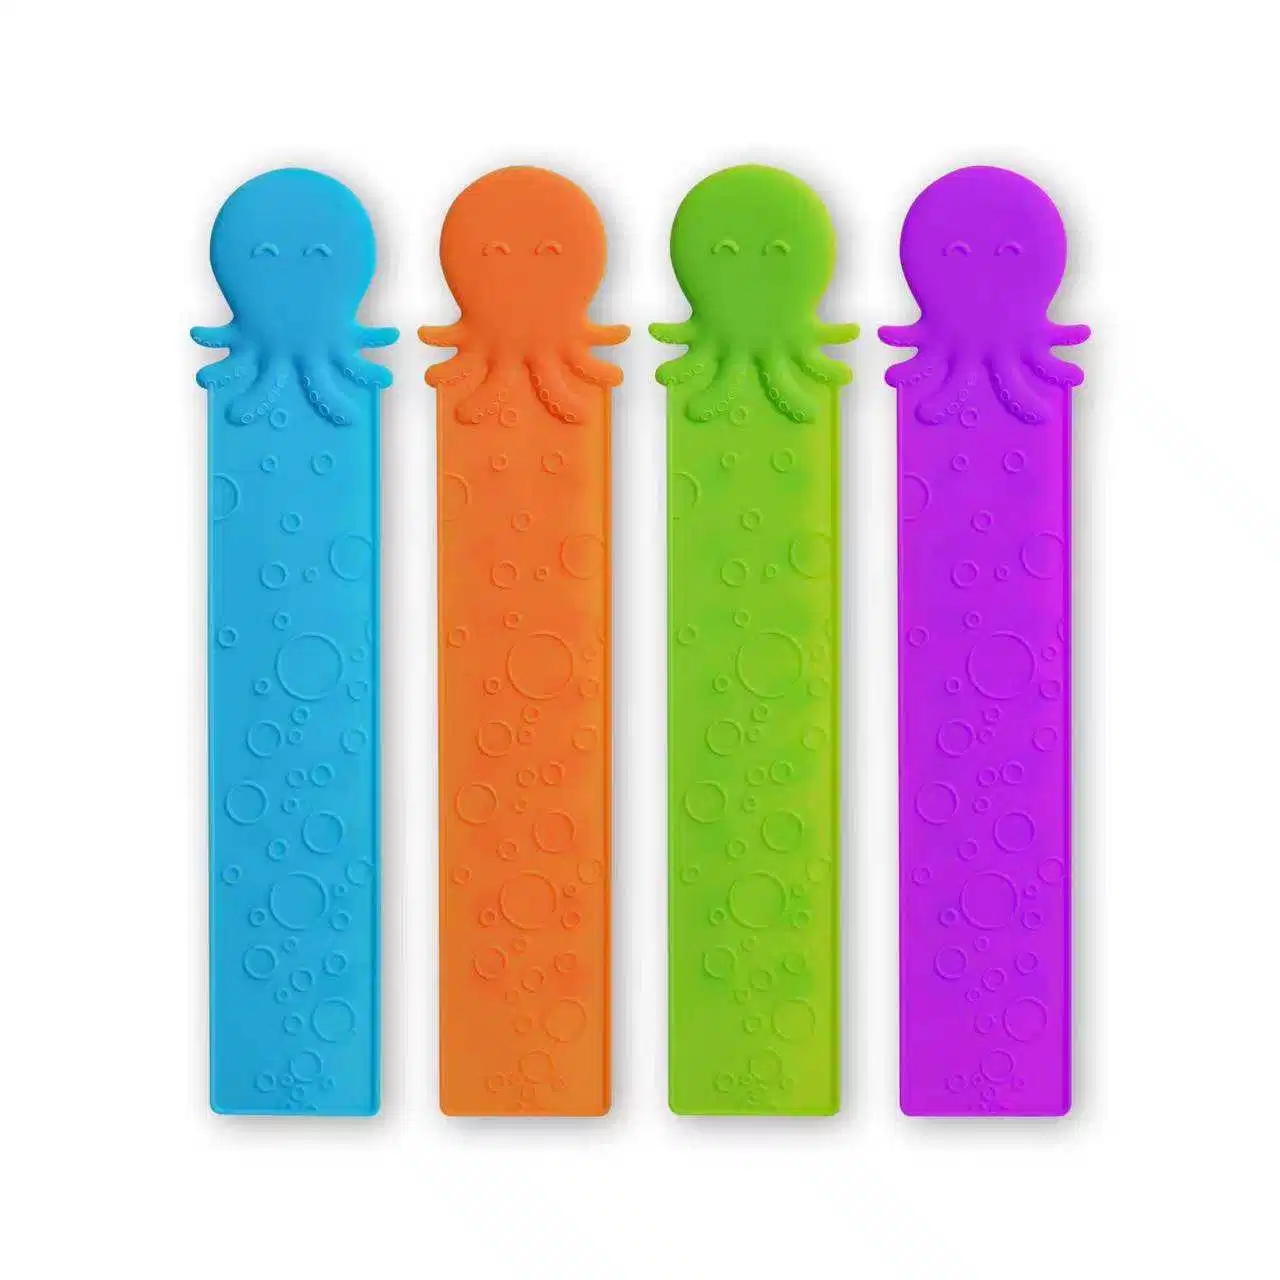 Sensory Toys Stress Anxiety Relief Squidopop Magic Sucker Suction Cup Pop Toys Fidgets for Kids Adults